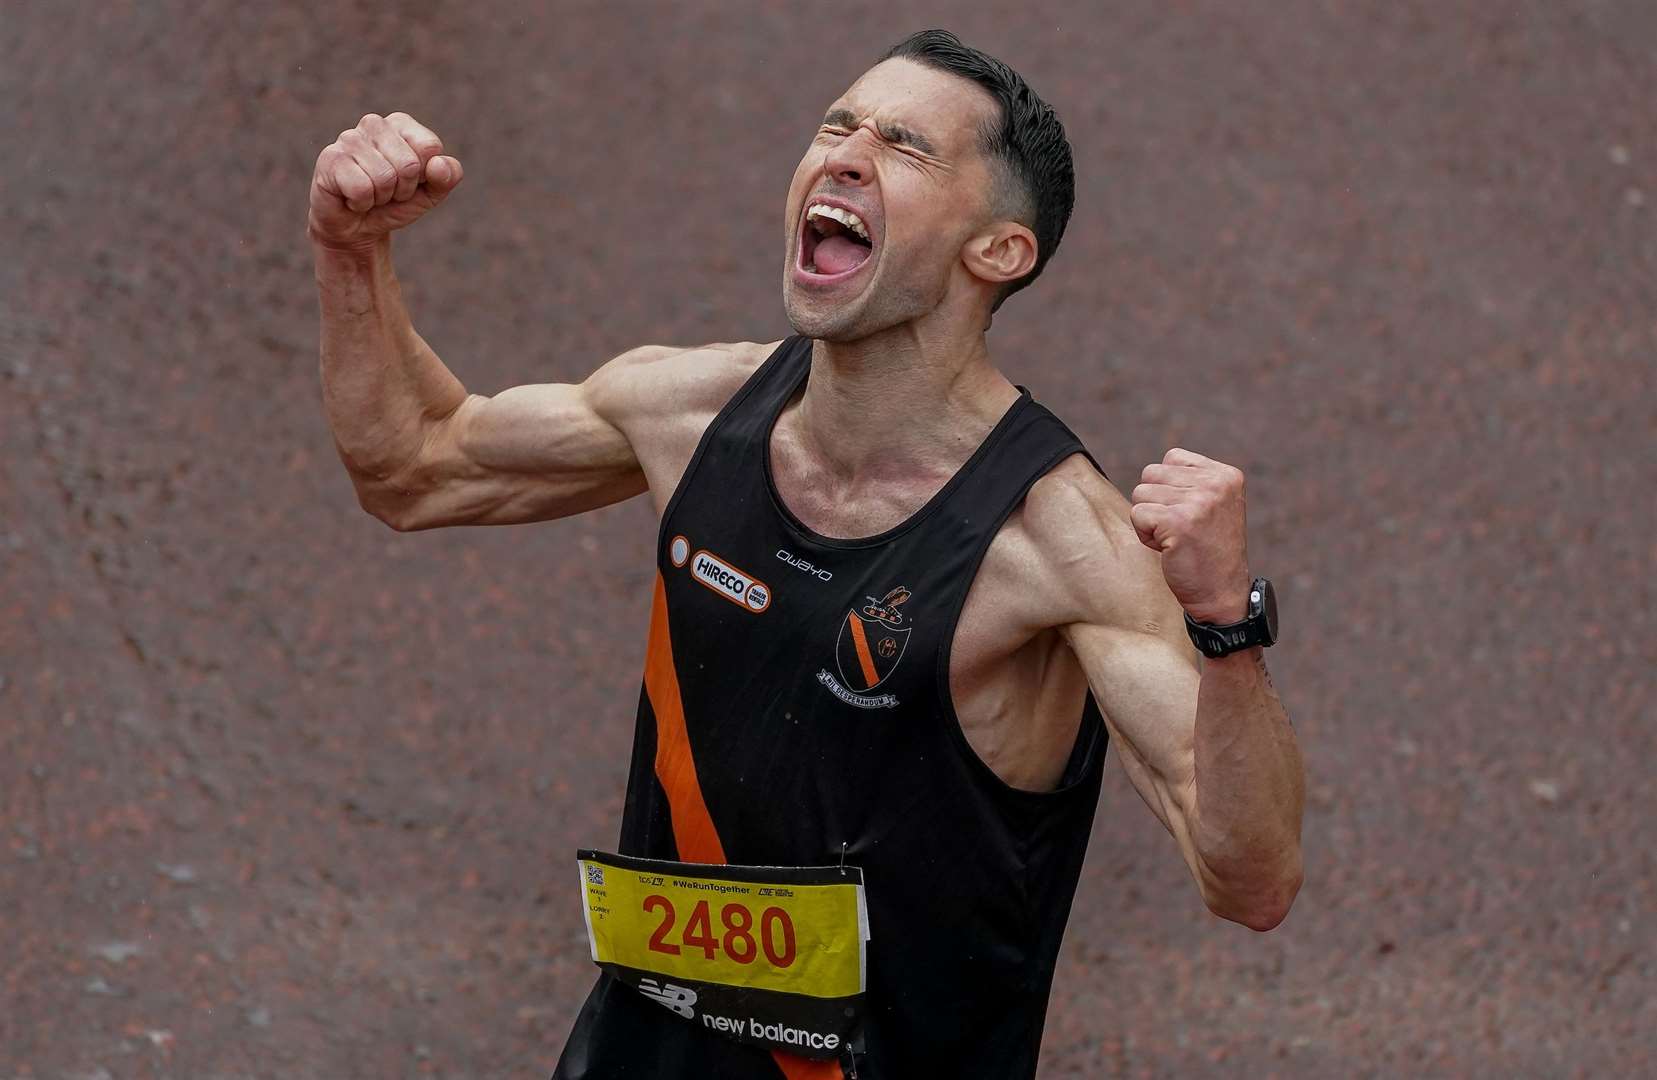 Runner Karl Nolan shows his delight at crossing the finishing line in 2023. Image: TCS London Marathon.